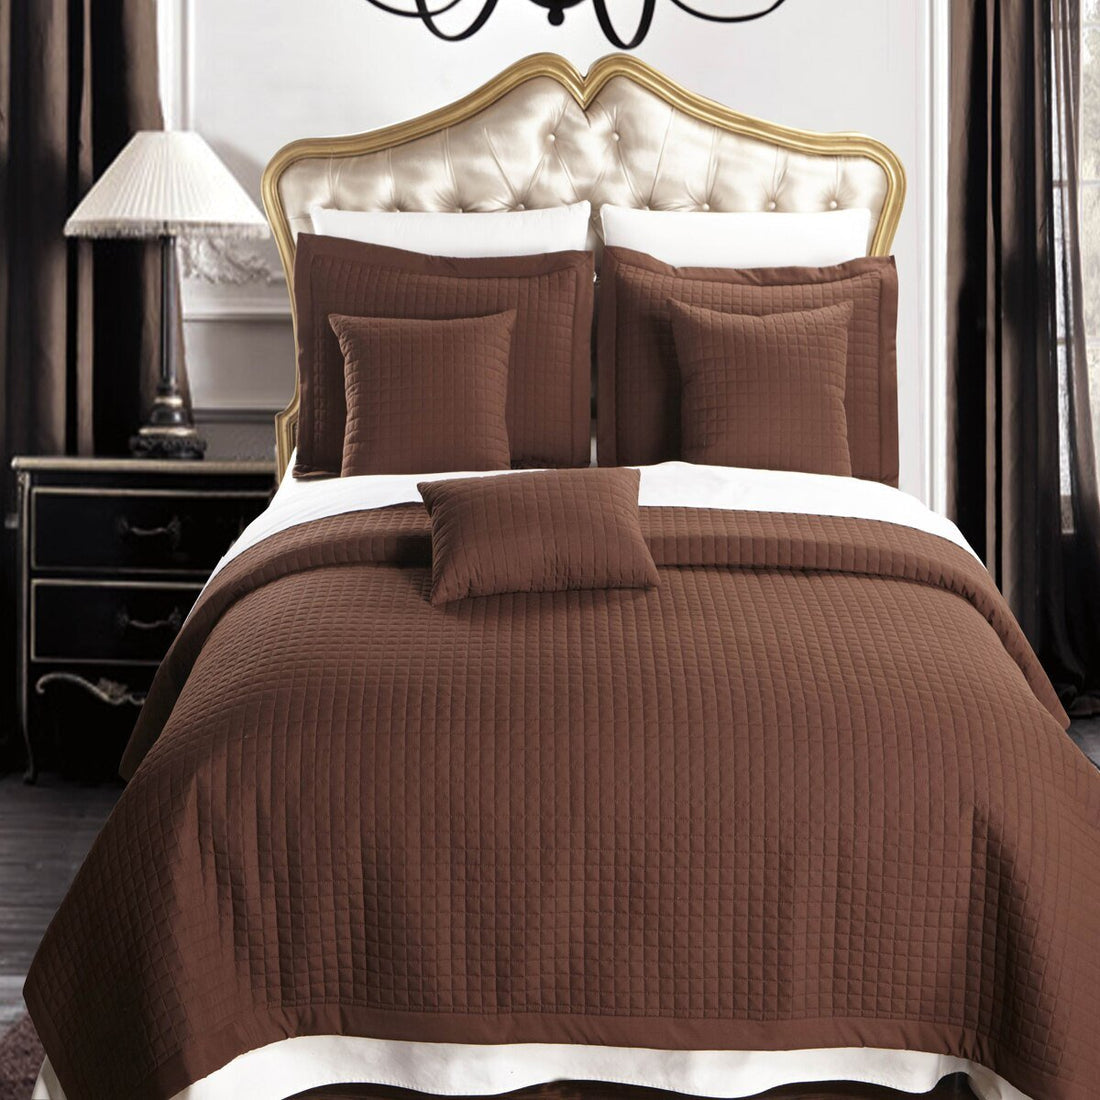 Luxury Checkered Quilted Wrinkle-Free 2-3 Piece Quilted Coverlet Set Chocolate